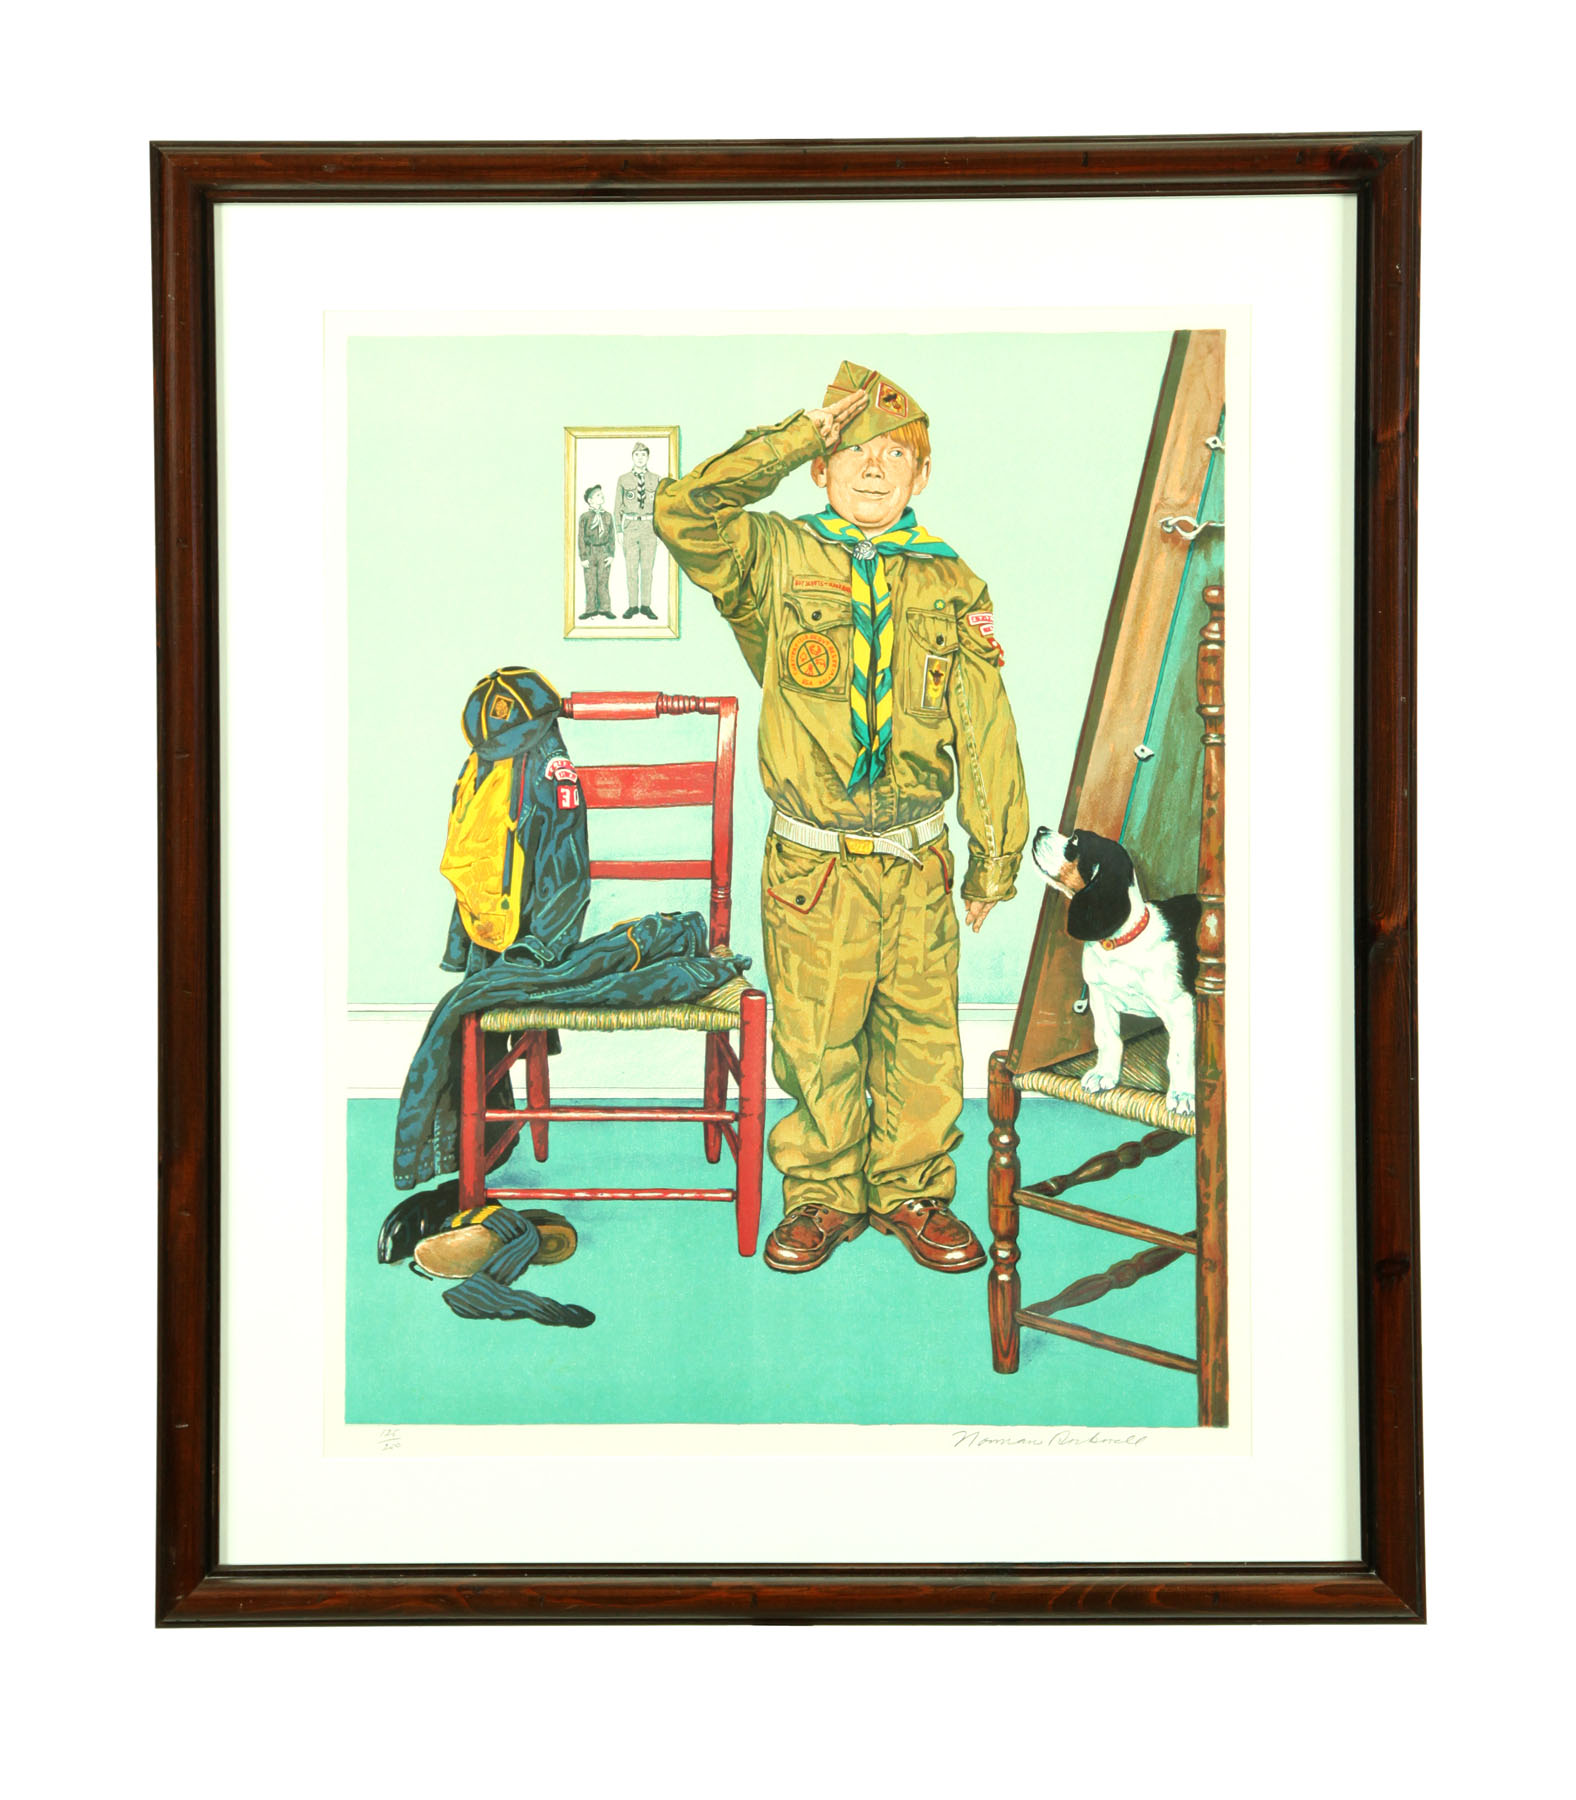 CAN'T WAIT PRINT BY NORMAN ROCKWELL